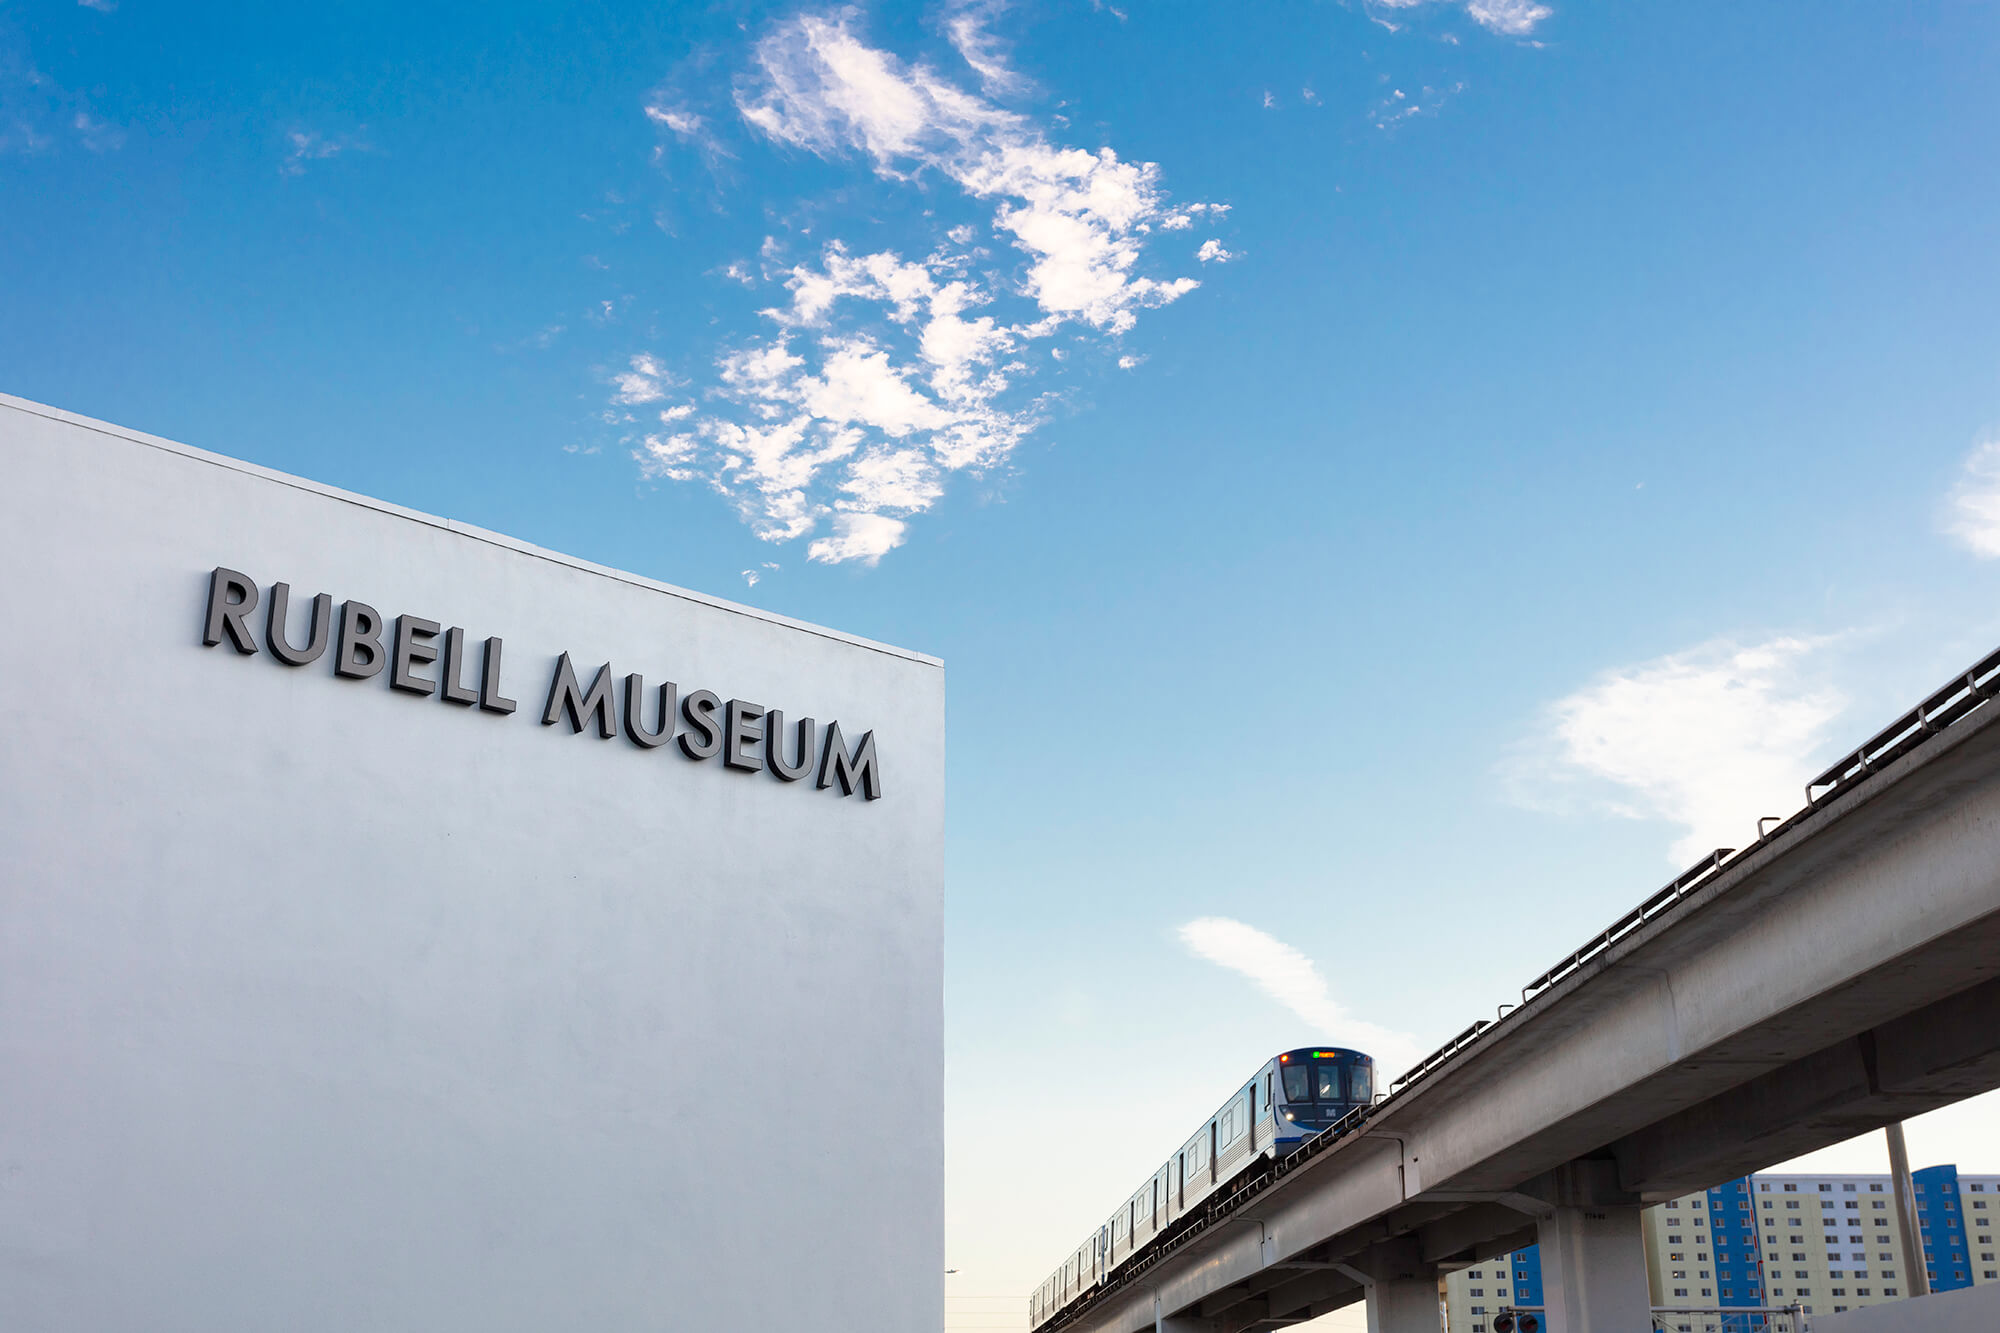 RUBELL MUSEUM IS A TOP MIAMI DESTINATION Join Our Britto Charette Team on a Virtual Field Trip